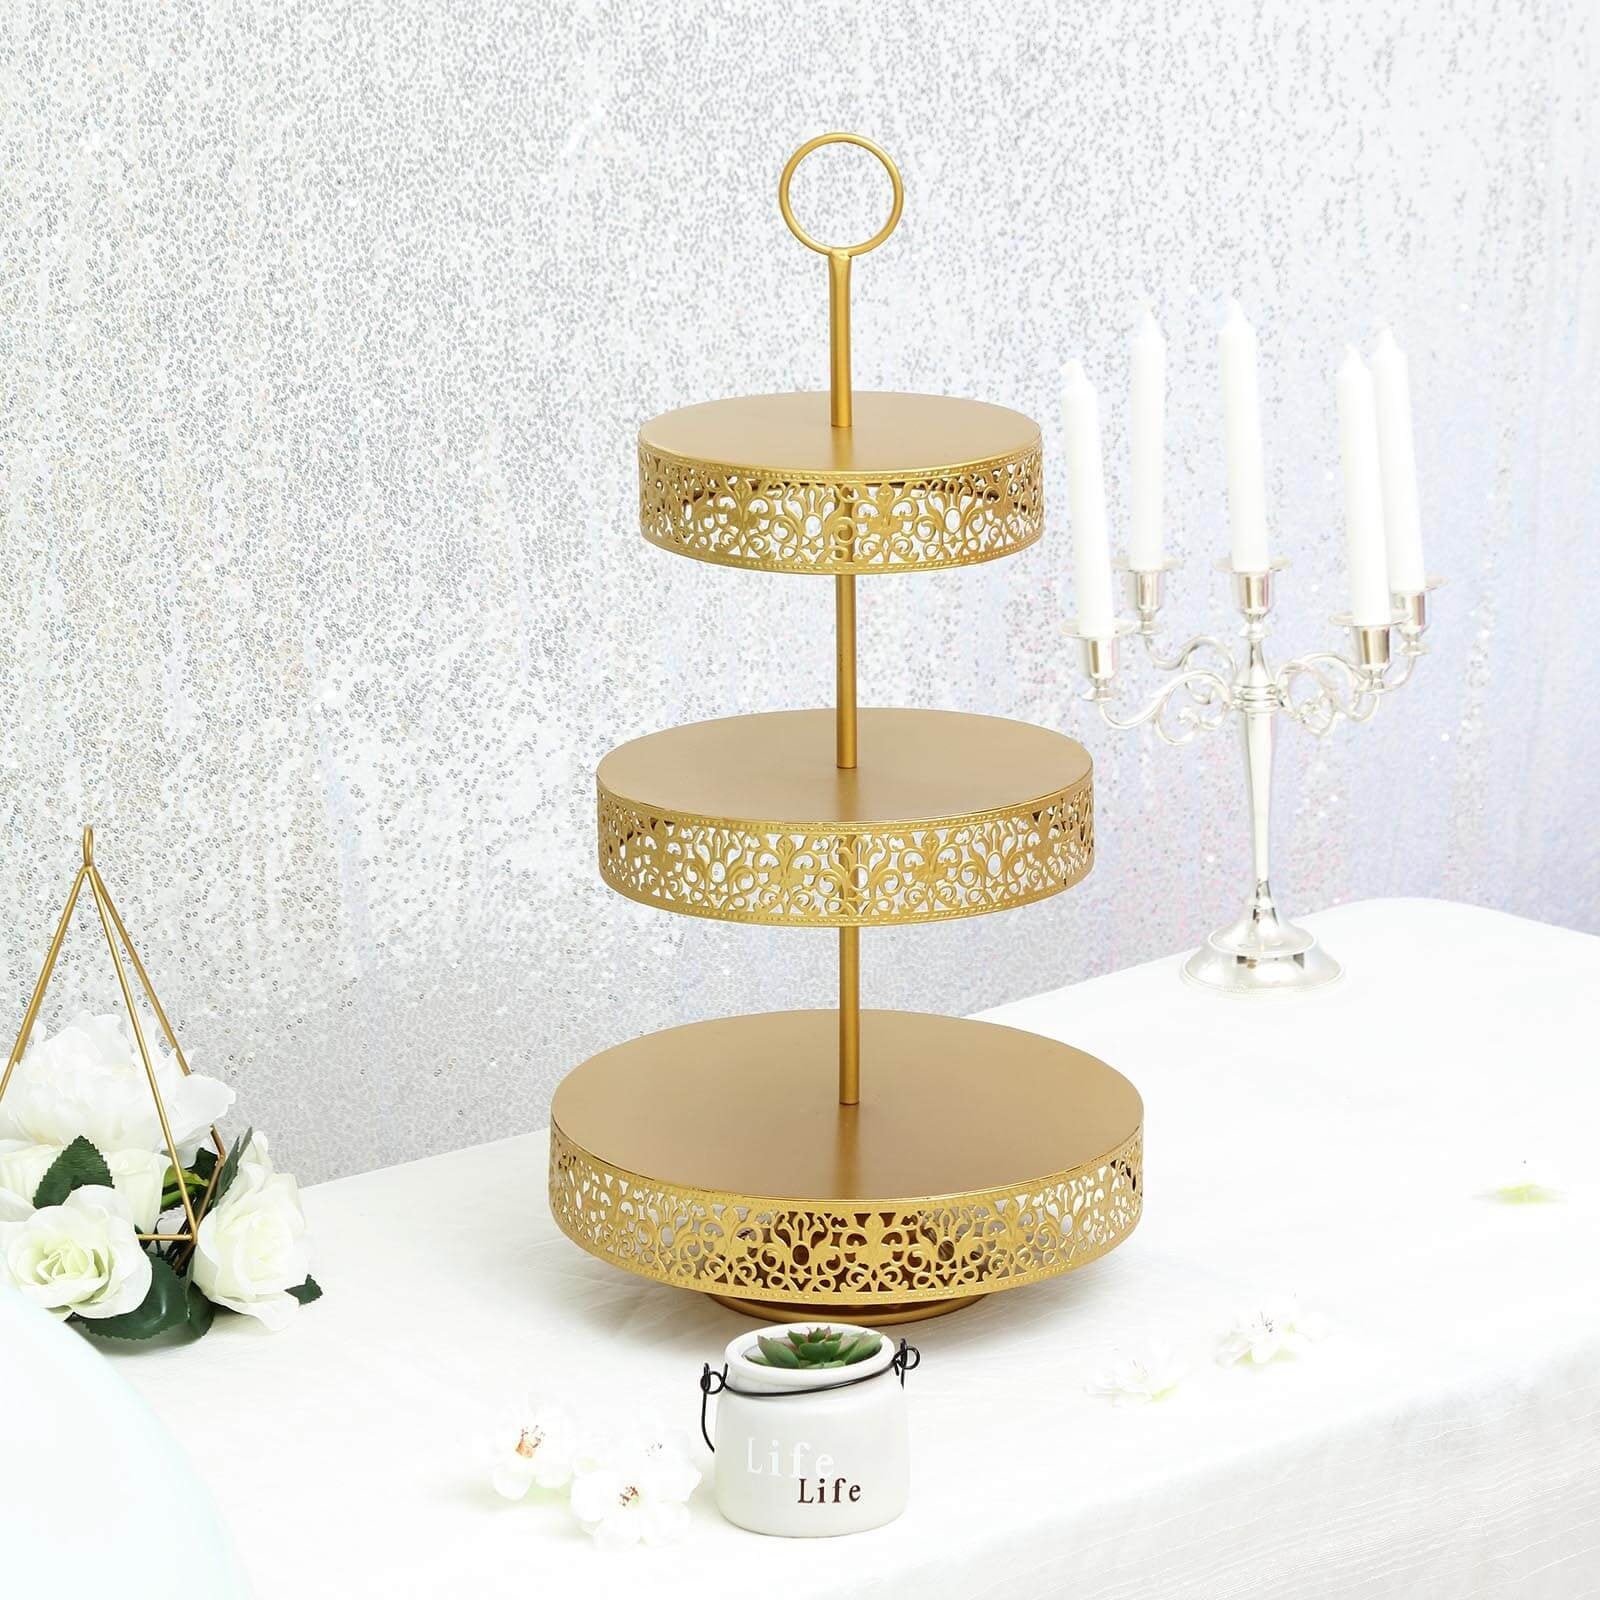 Gold Cupcake Stand-Gold Dessert Stand-Gold Cake Stand-3 Tiered Cake Stand for Wedding Stainless Steel